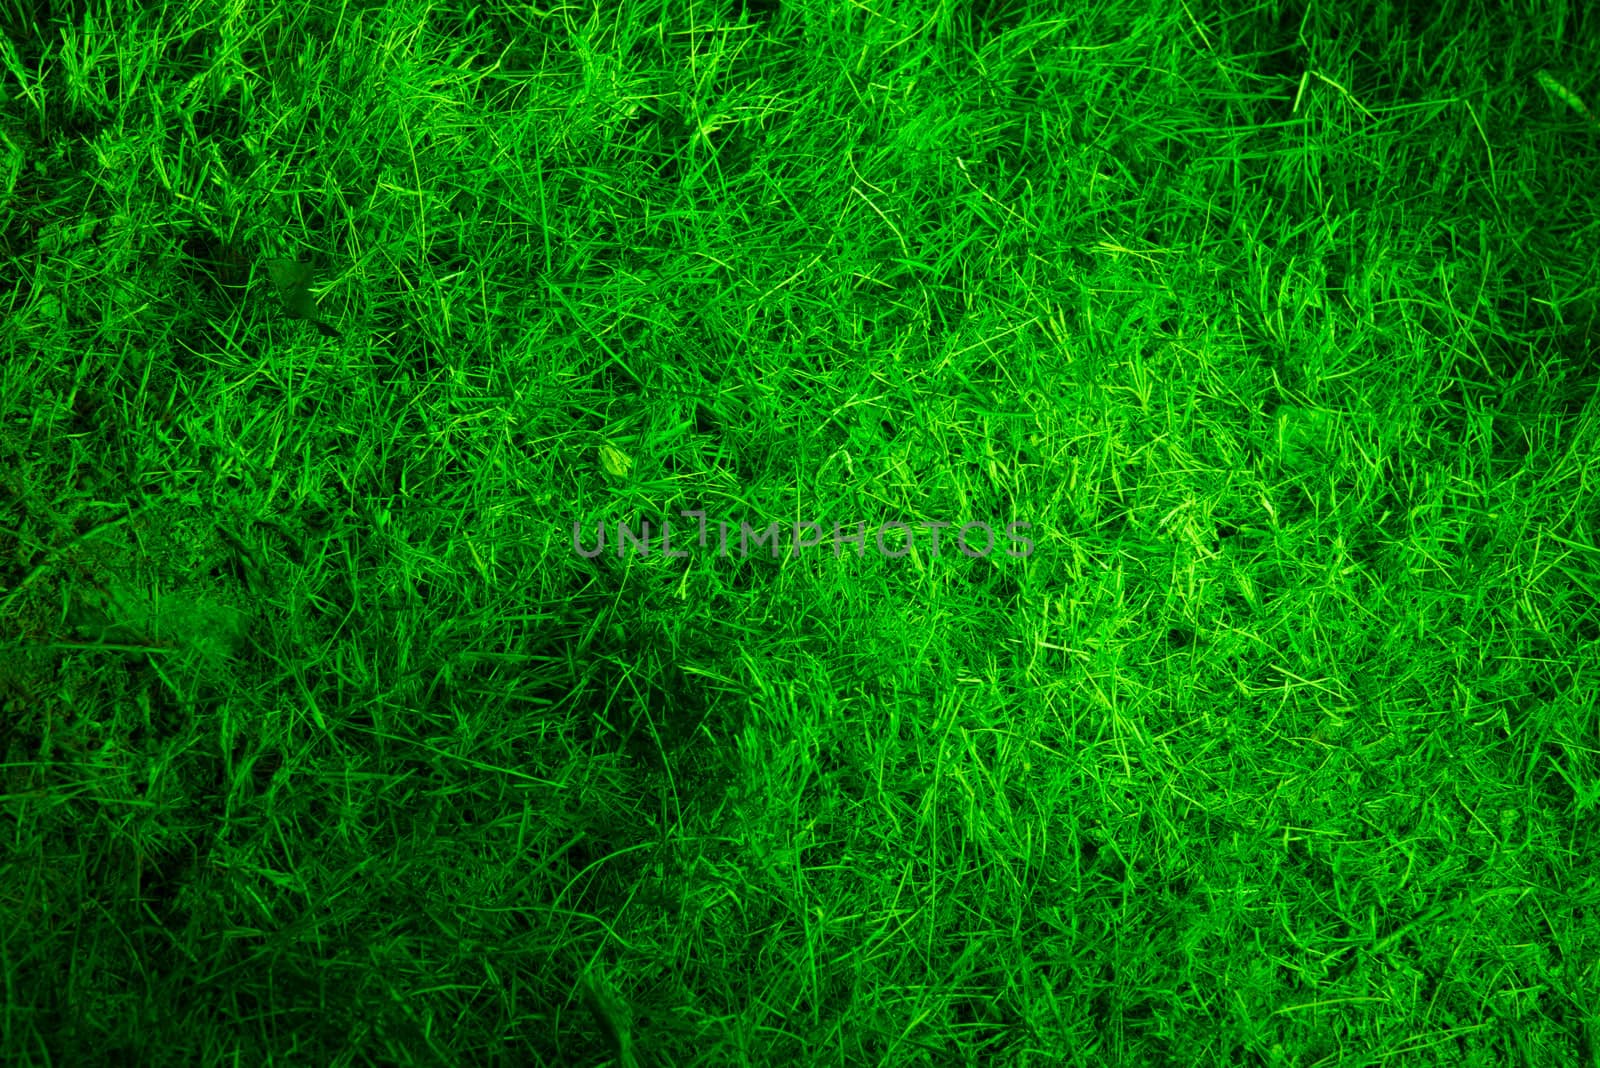 Illuminated green grass field, can be used as background